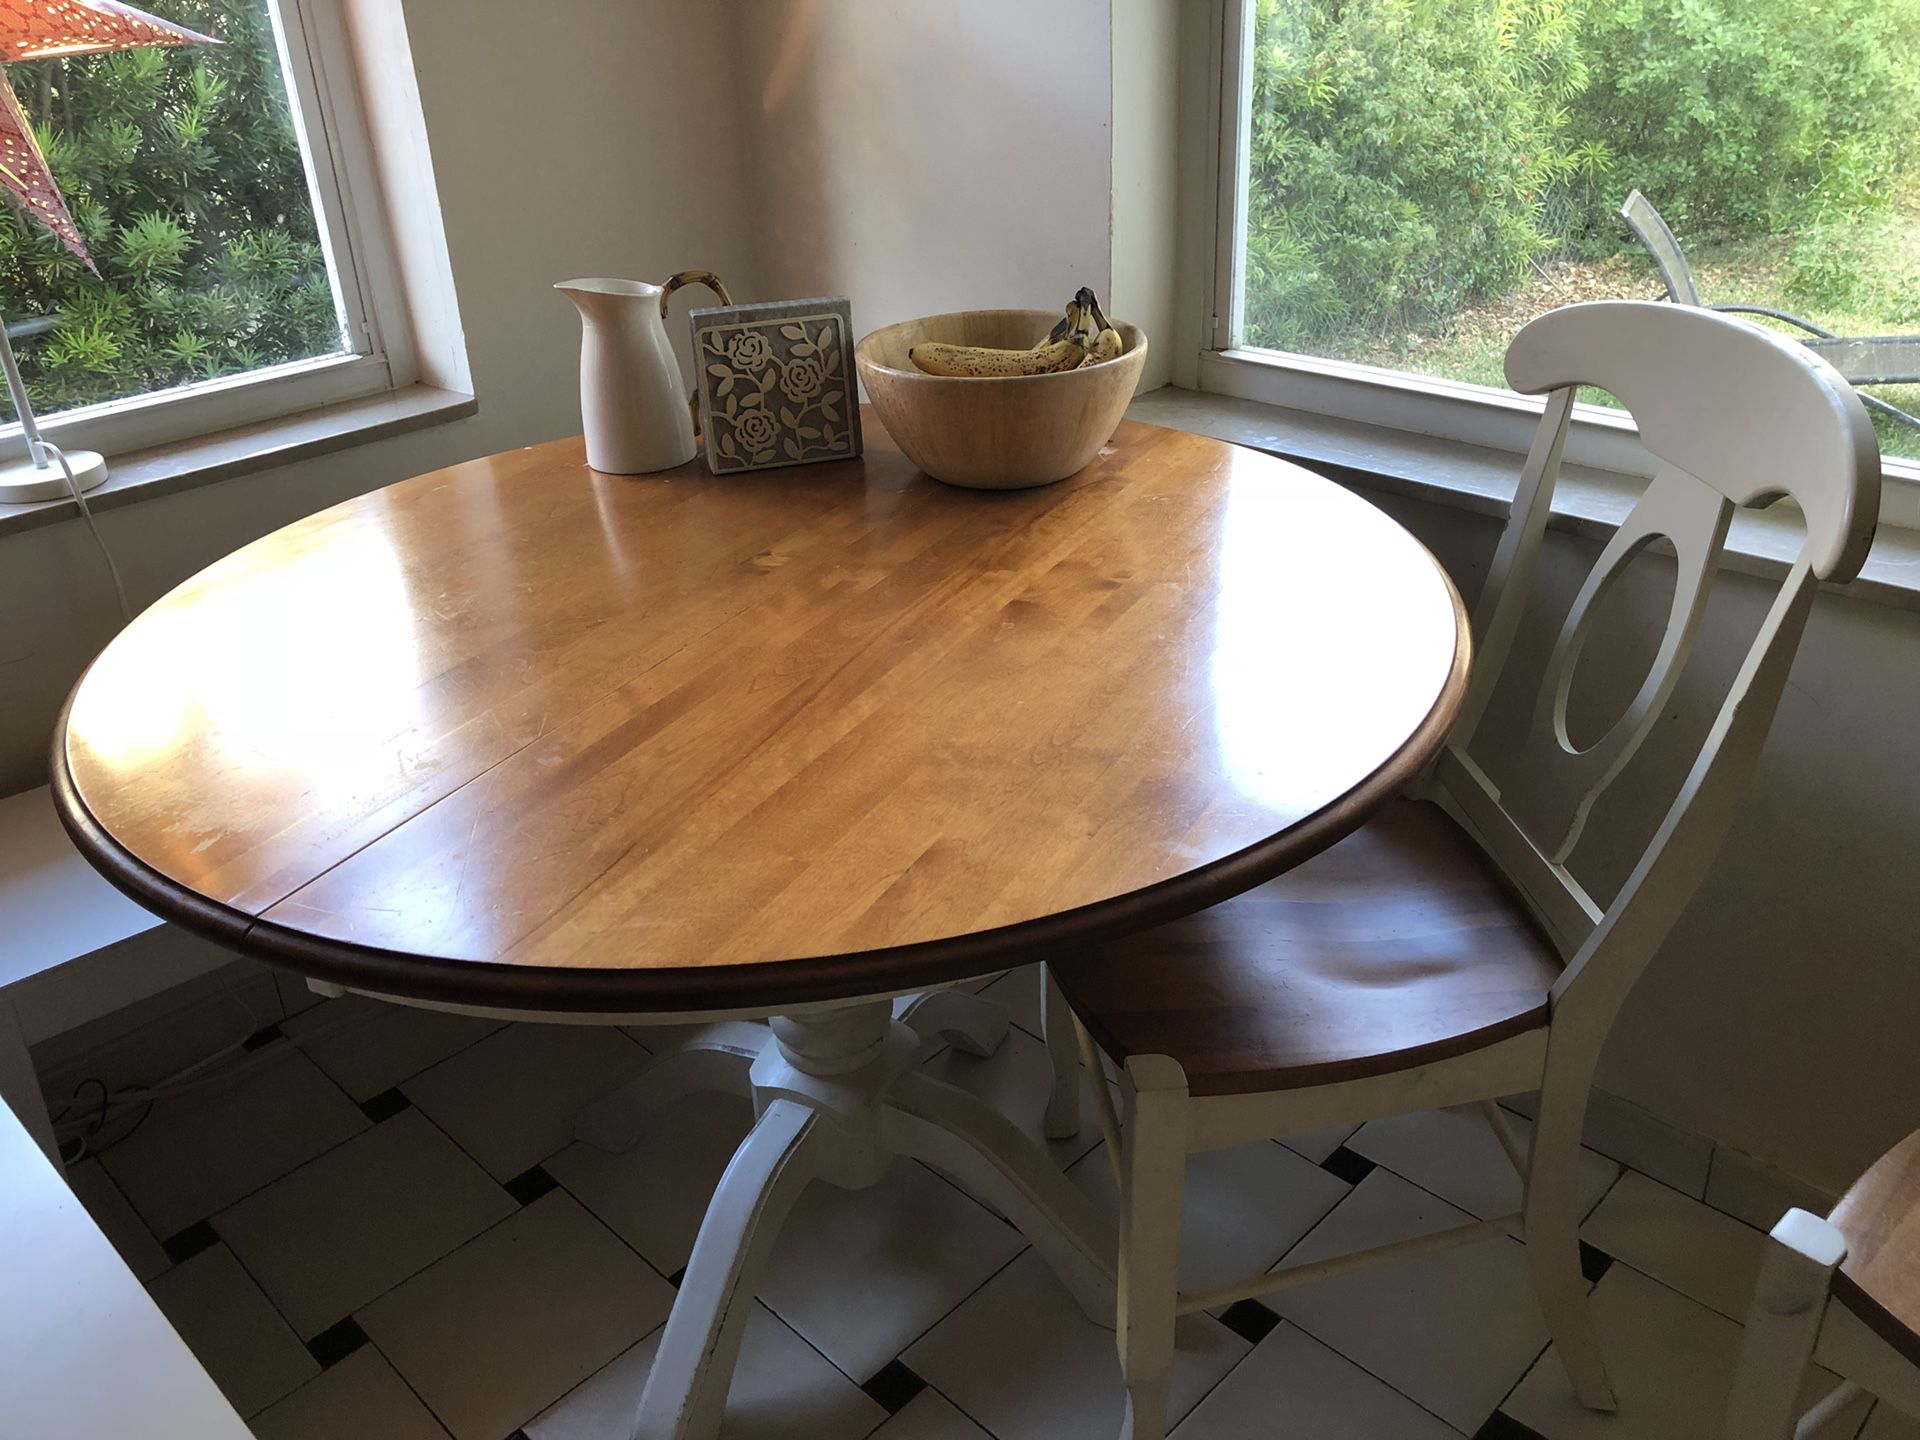 Kitchen Dining Table Set with 4 Chairs